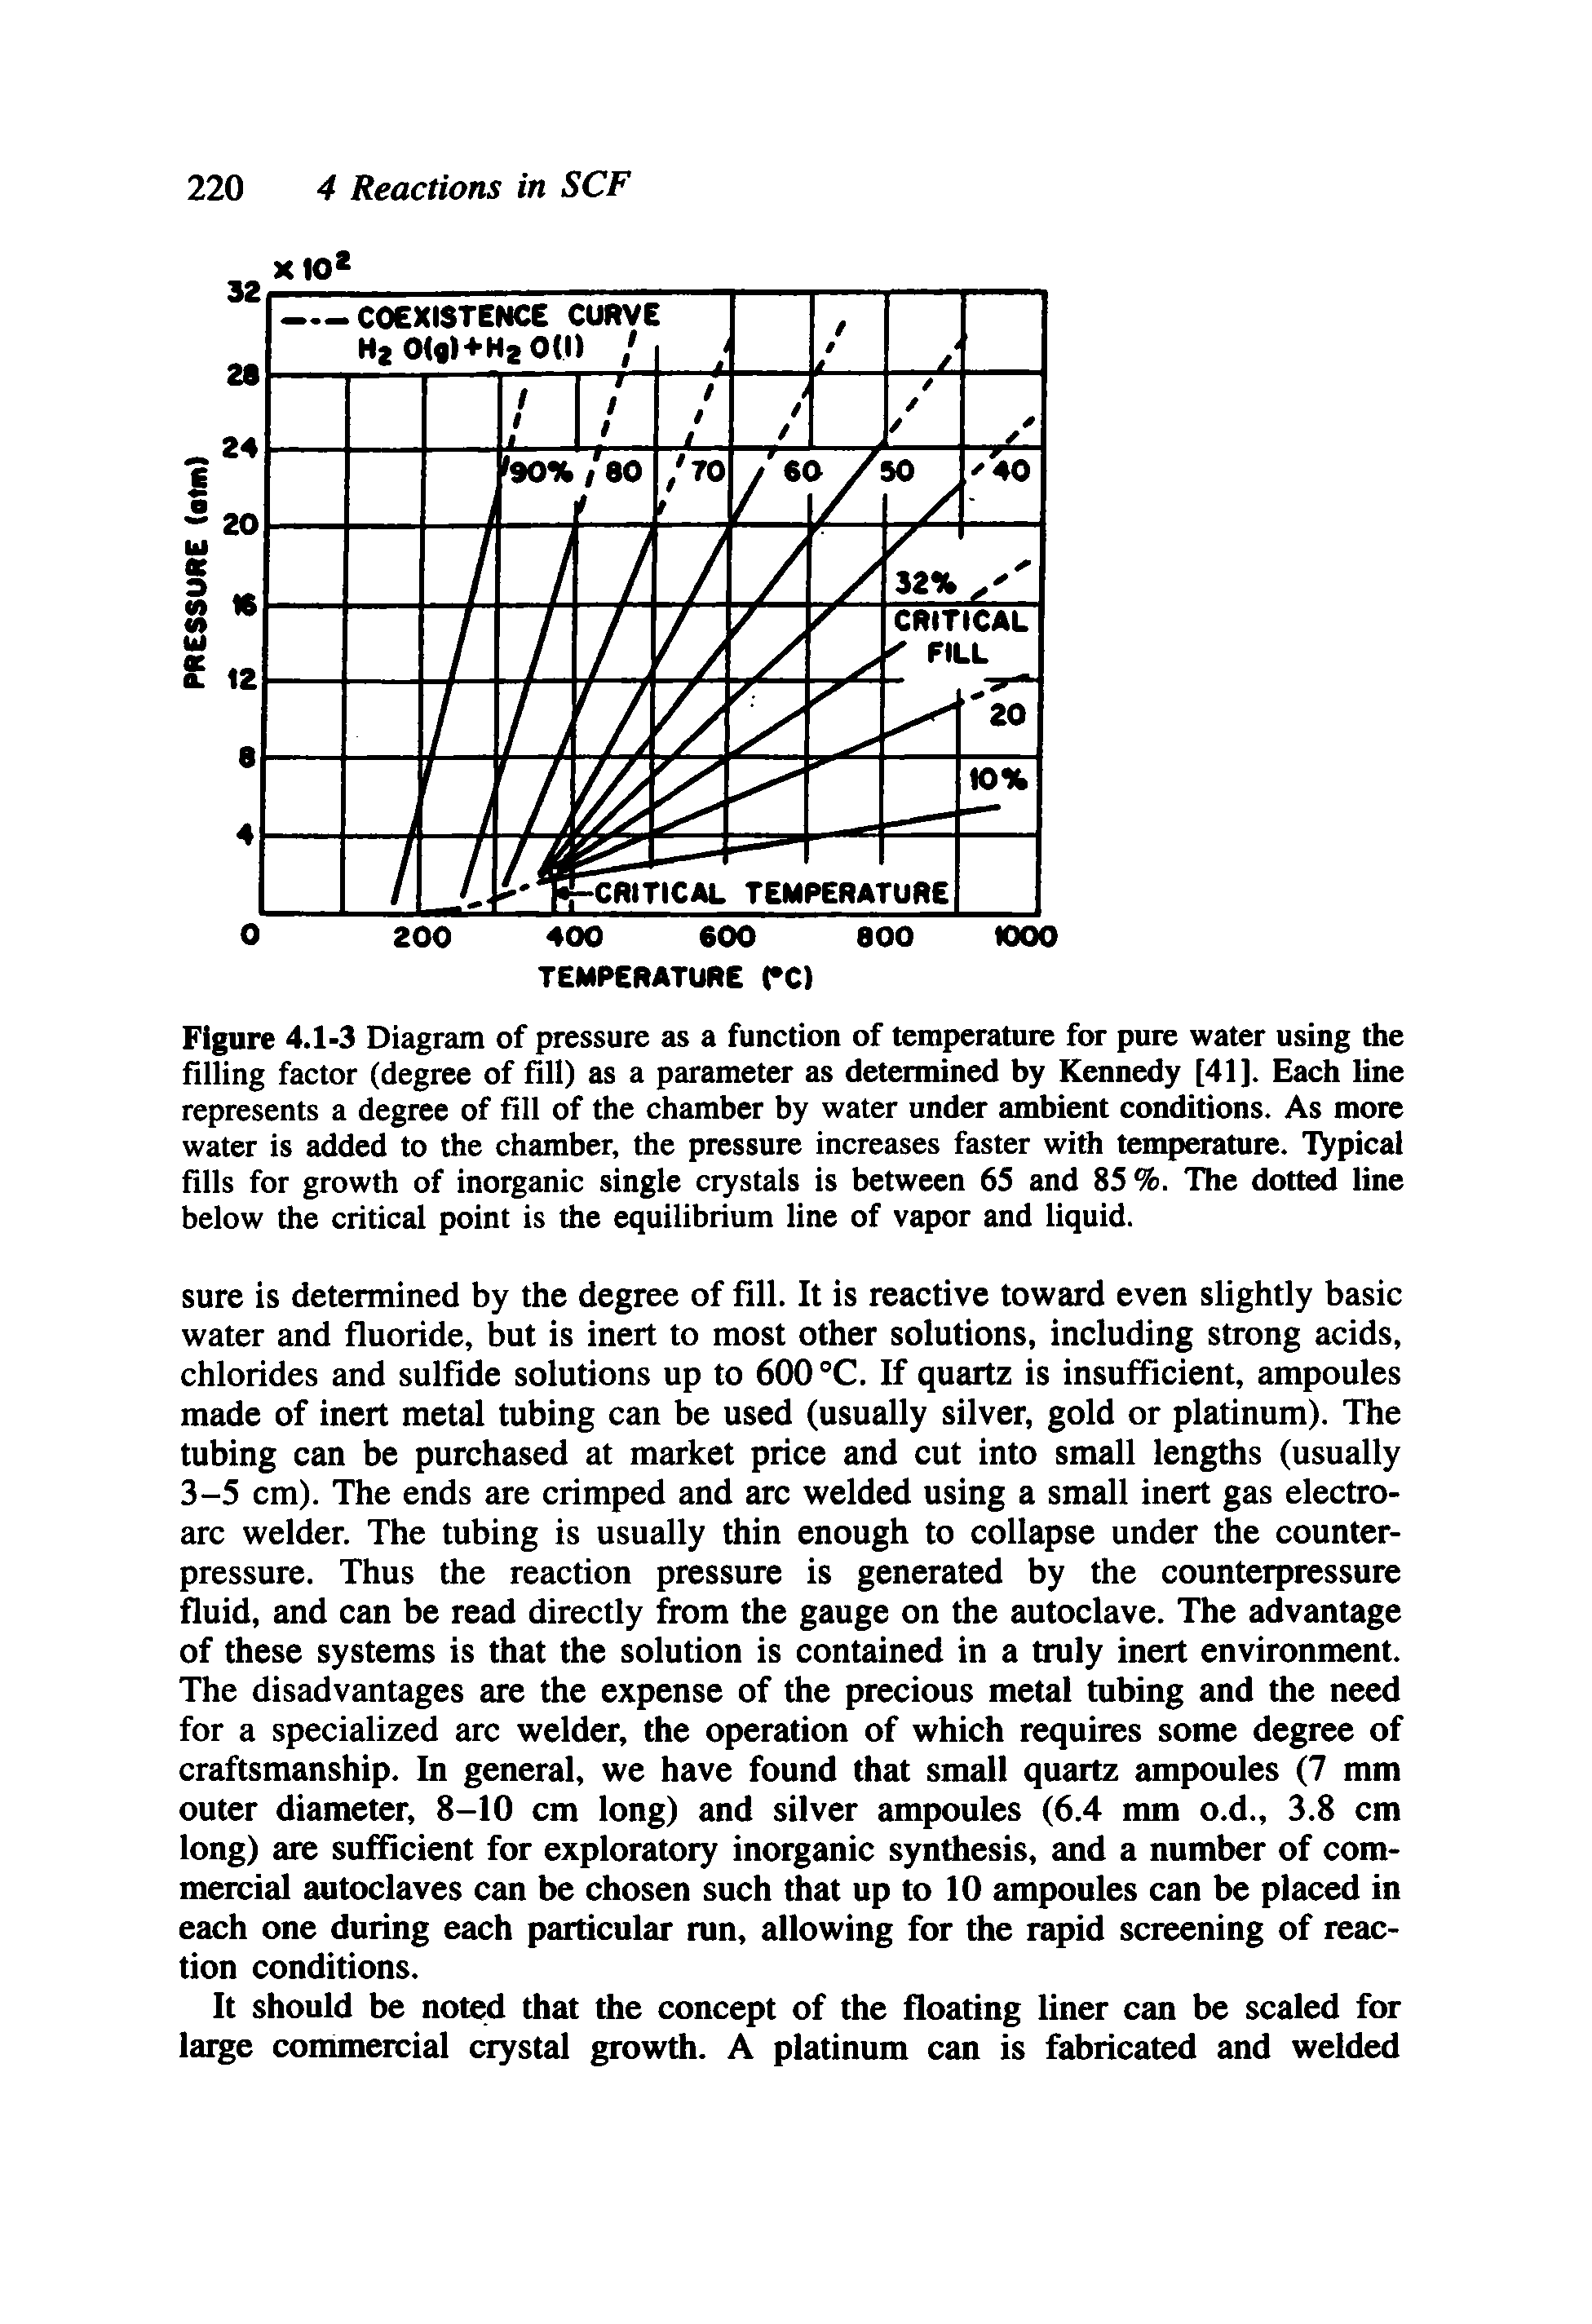 Figure 4.1-3 Diagram of pressure as a function of temperature for pure water using the filling factor (degree of fill) as a parameter as determined by Kennedy [41]. Each line represents a degree of fill of the chamber by water under ambient conditions. As more water is added to the chamber, the pressure increases faster with temperature. Topical fills for growth of inorganic single crystals is between 65 and 85 %. The dotted line below the critical point is the equilibrium line of vapor and liquid.